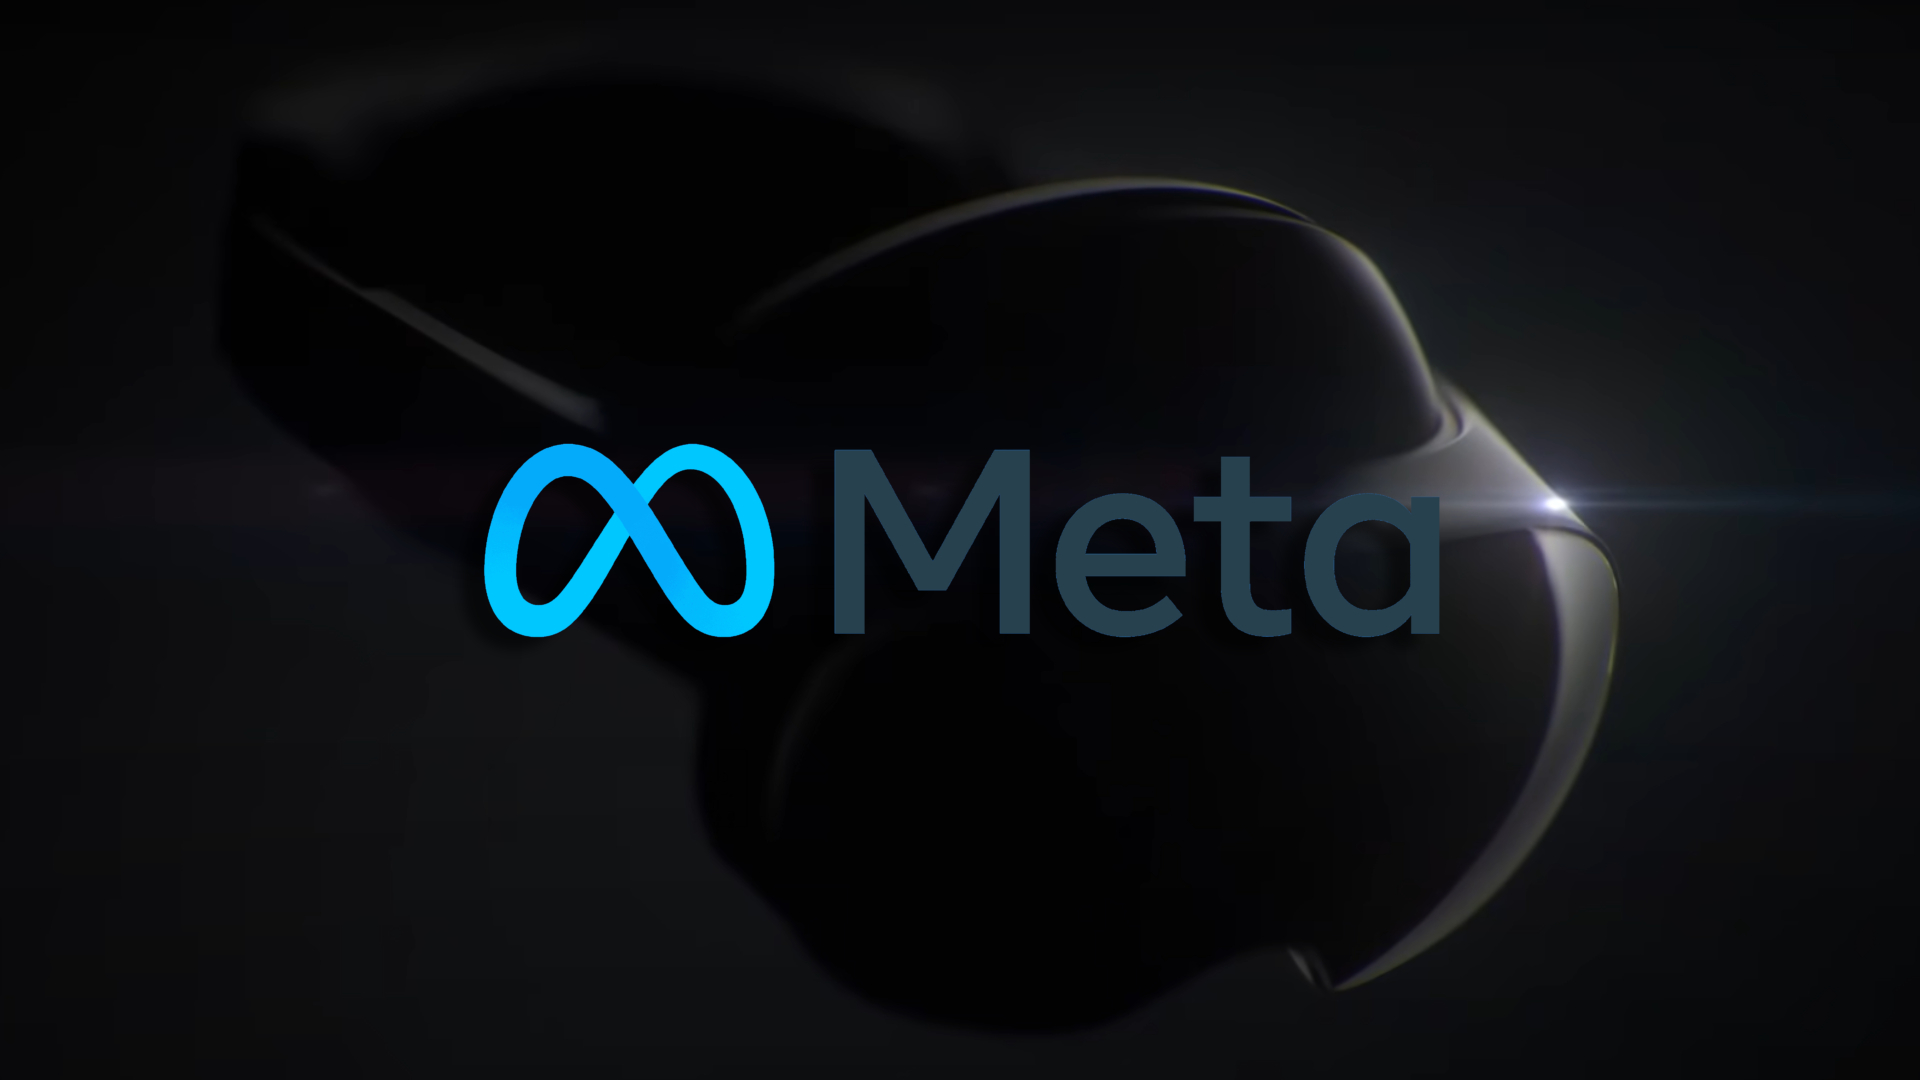 Oculus Quest Pro – release date, price, and specs of Meta's headset